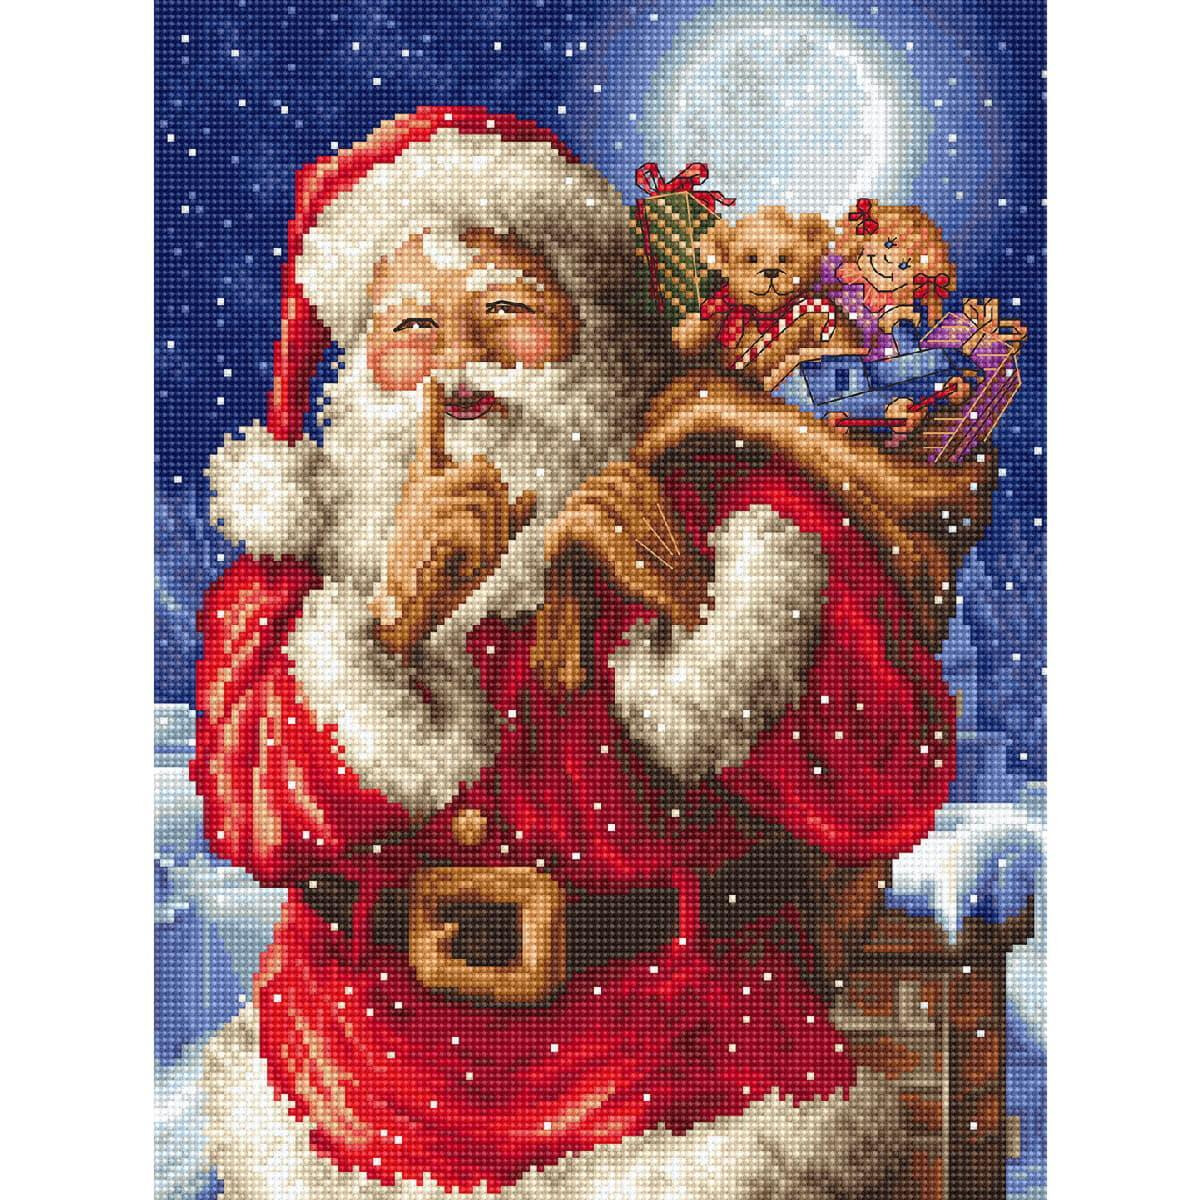 Letistitch counted cross stitch kit "Santas...